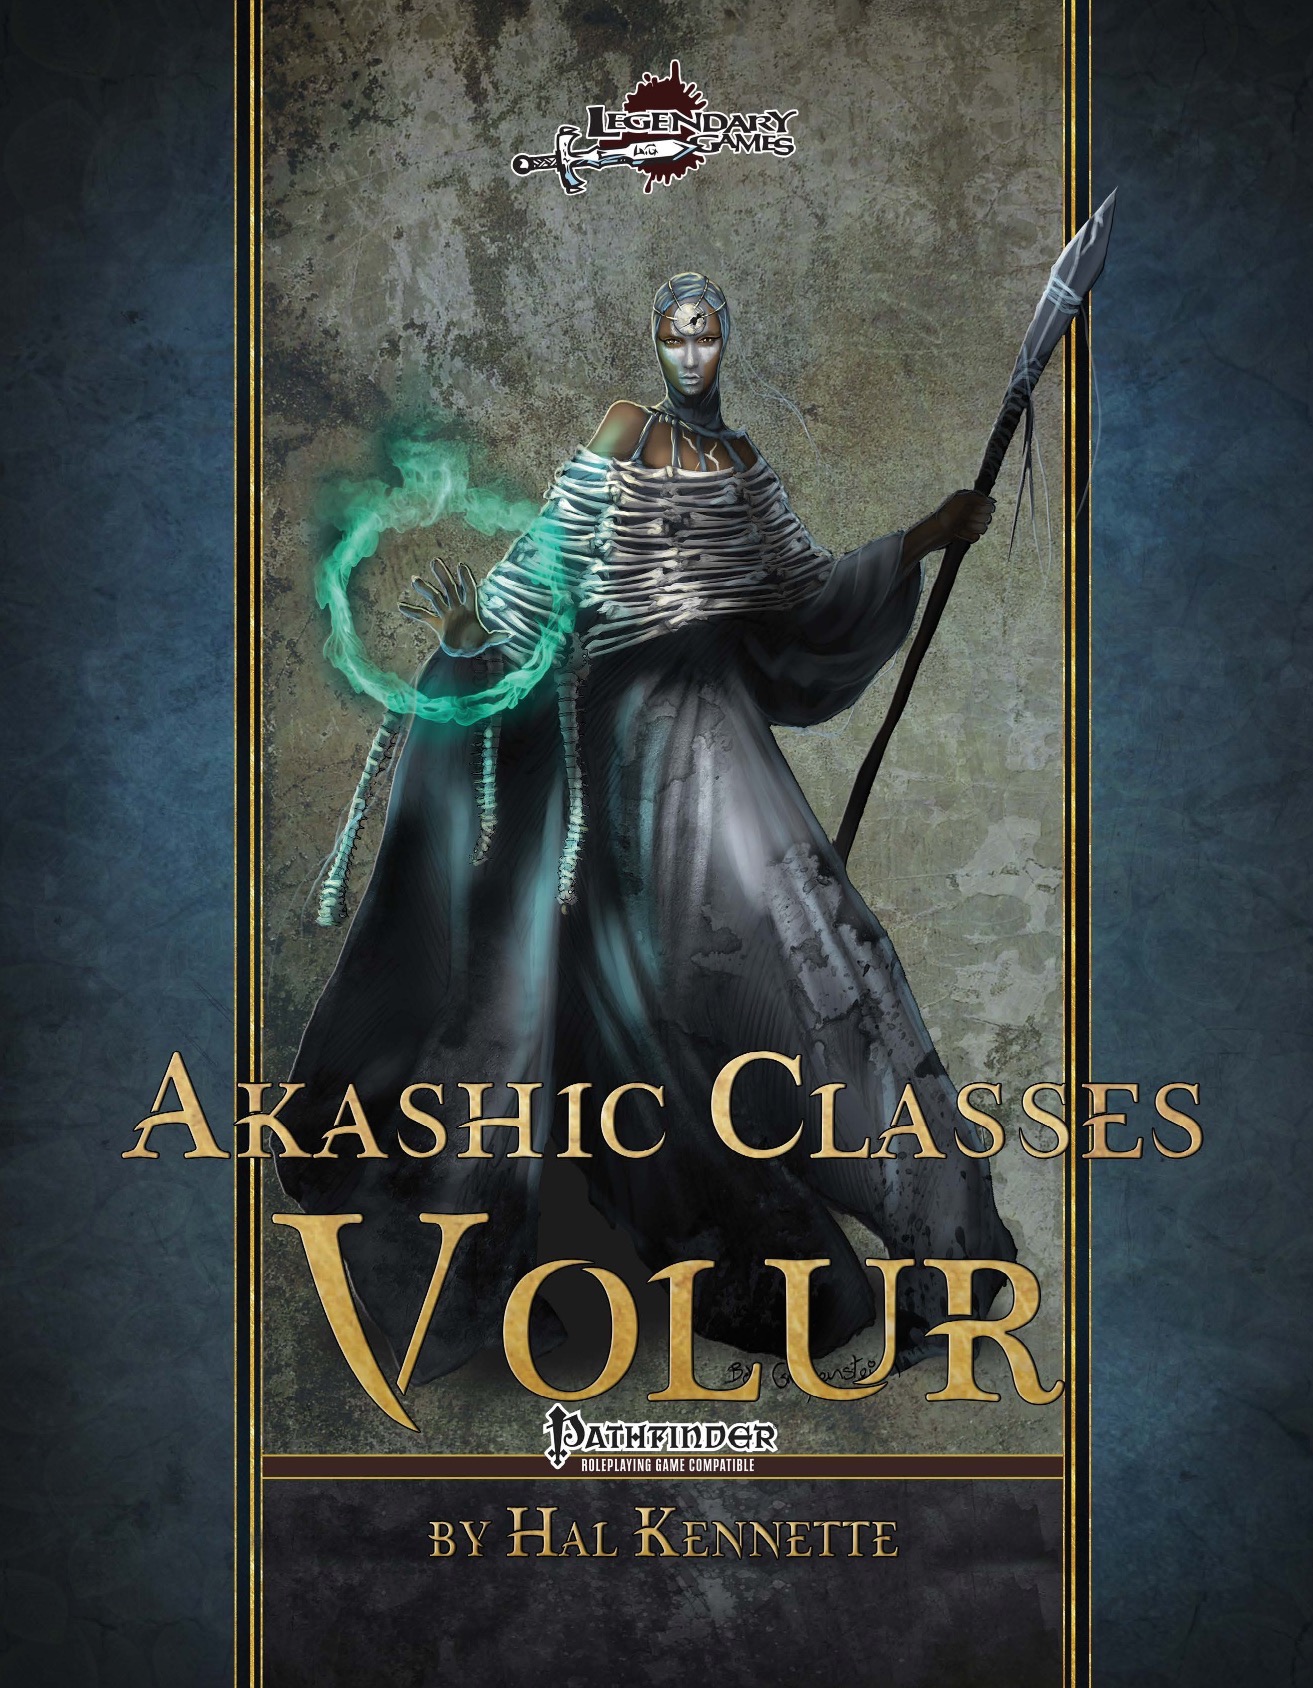 Akashic Classes: Volur (PFRPG) PDF, a woman dressed in a long black dress and a bone shall. She has a spear in one hand and is summoning magic with the other